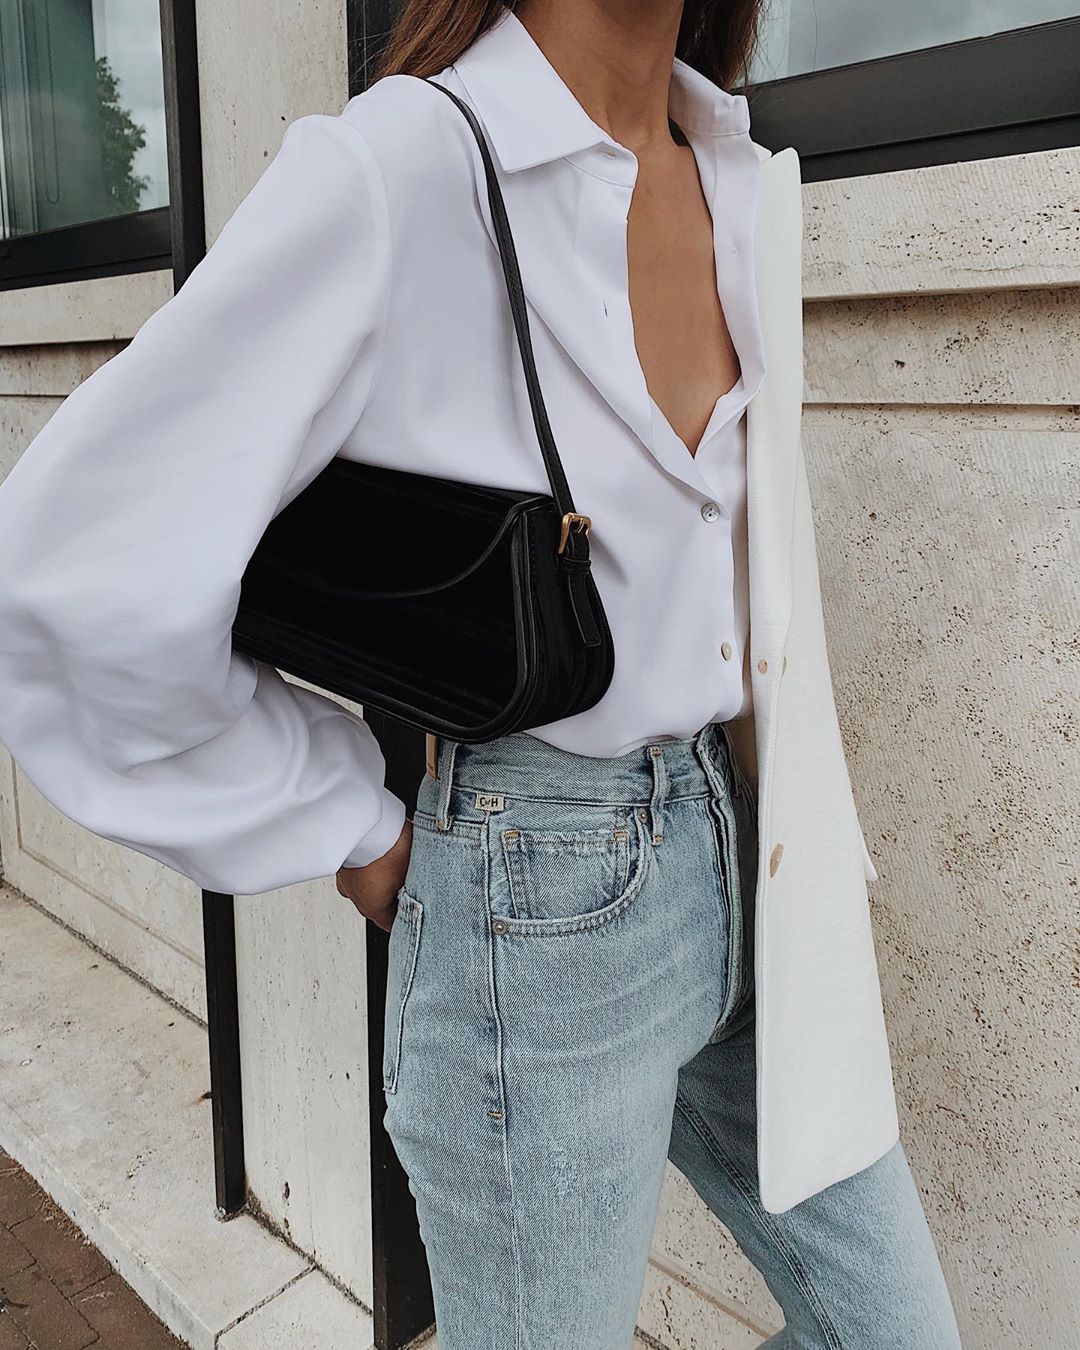 This Minimalist Denim Look Is Perfect for Fall